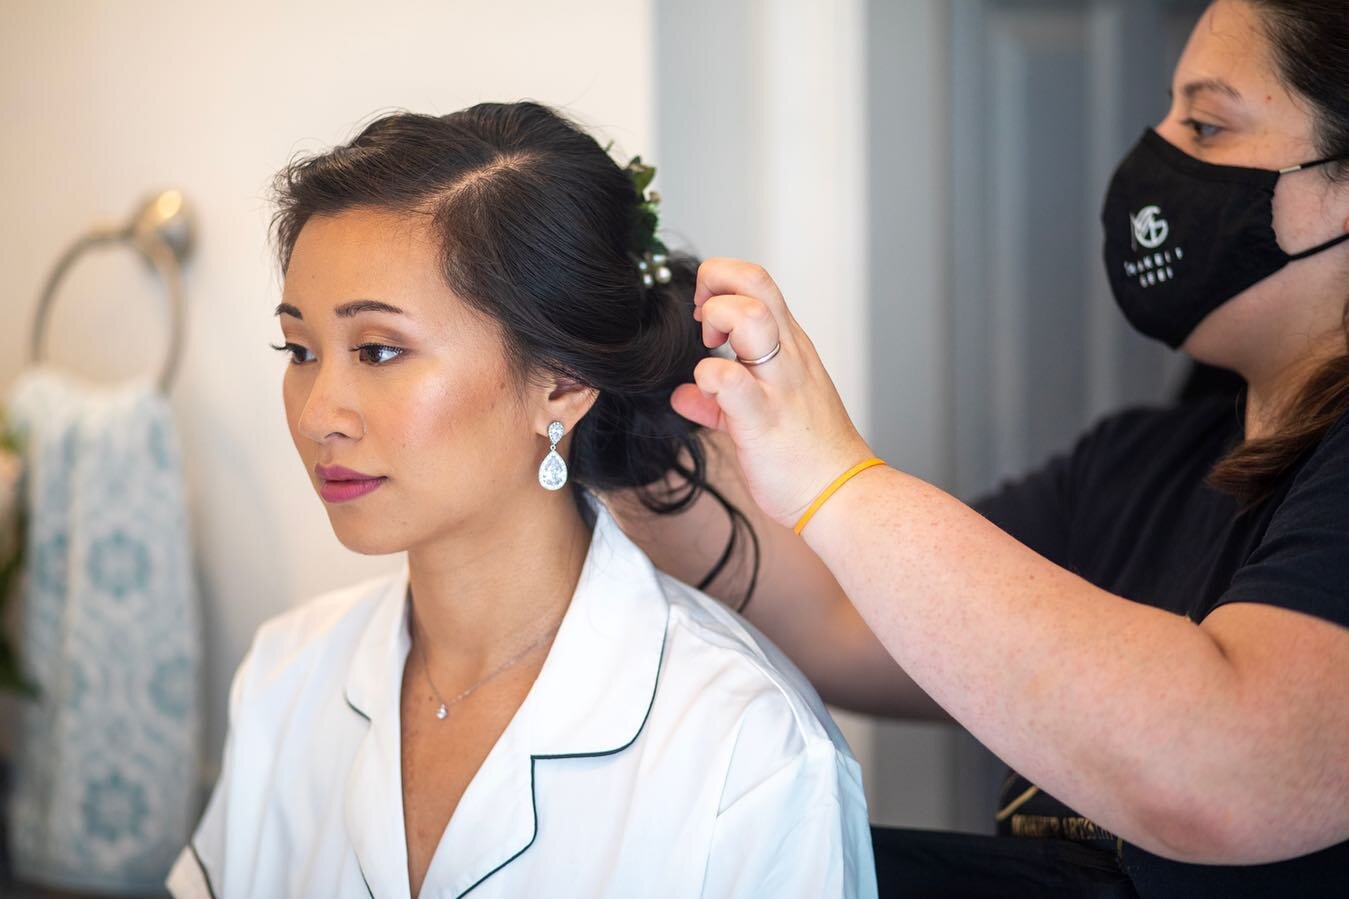 Getting ready photo from one of my beautiful 2020 brides. 😍Oh and note to self - remove bright yellow rubber band from my hand before pictures 🤦&zwj;♀️
Photo by @jannatulpramanikphotography